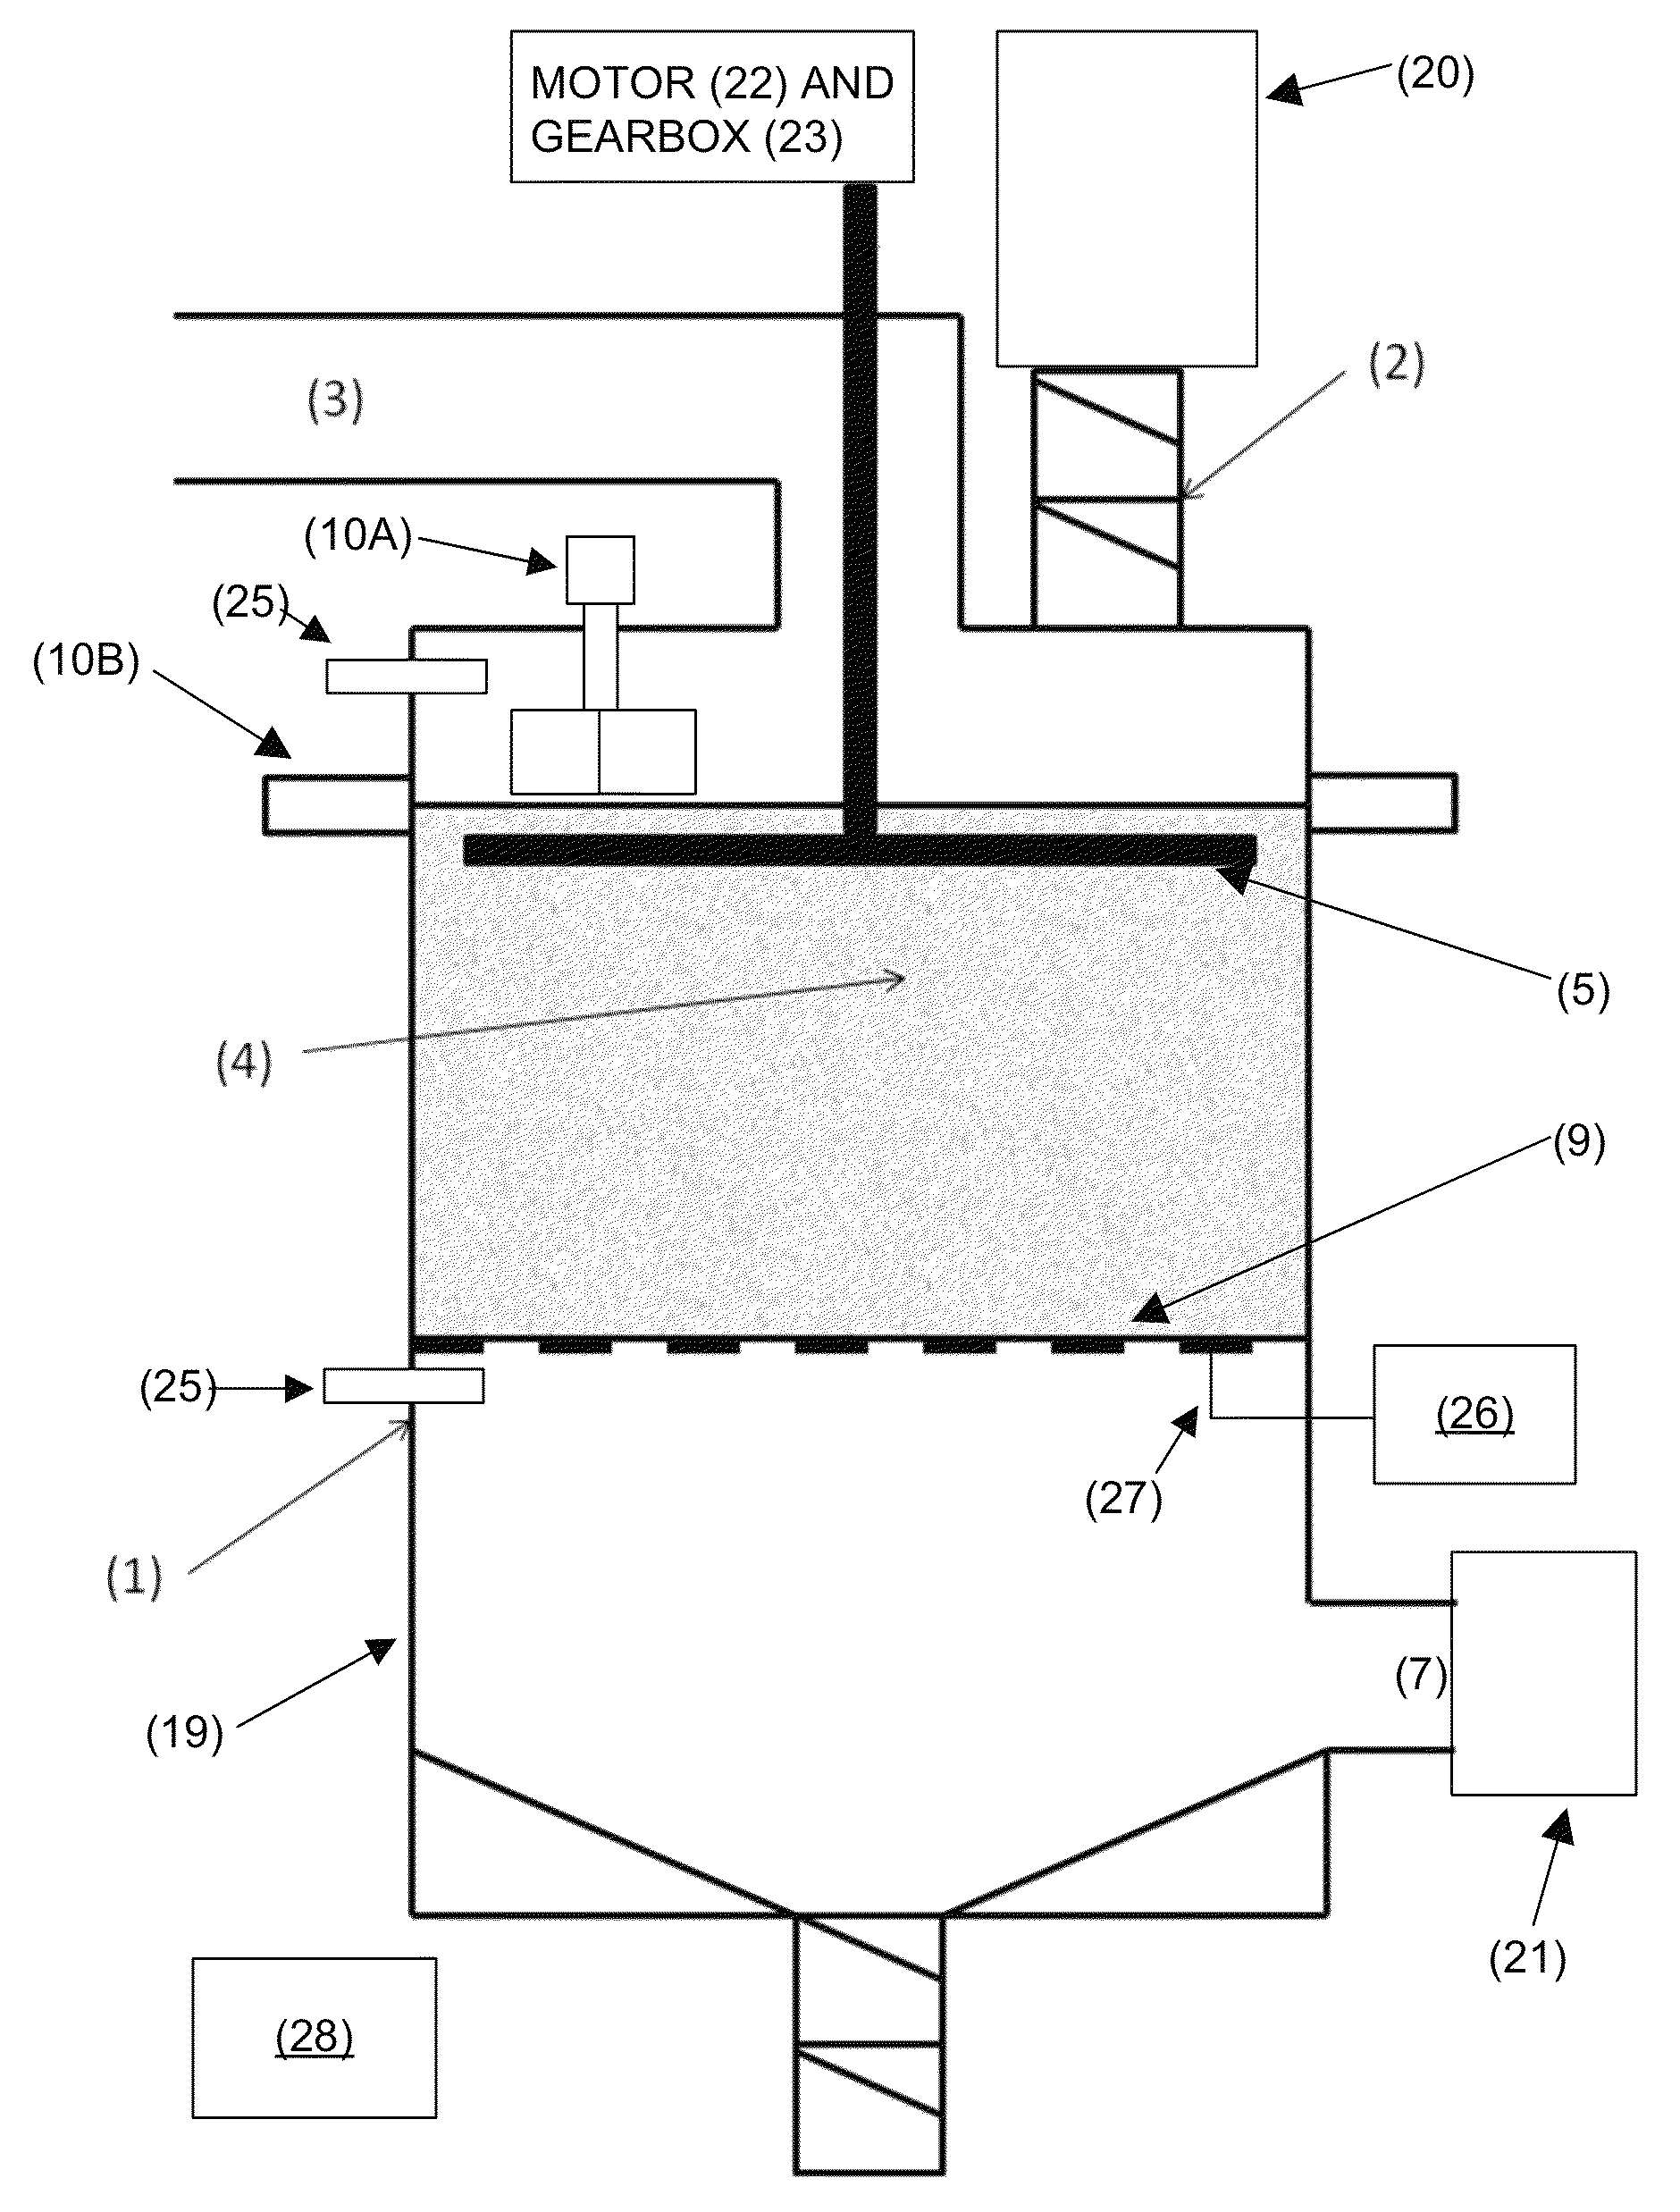 Downdraft gasifier with improved stability